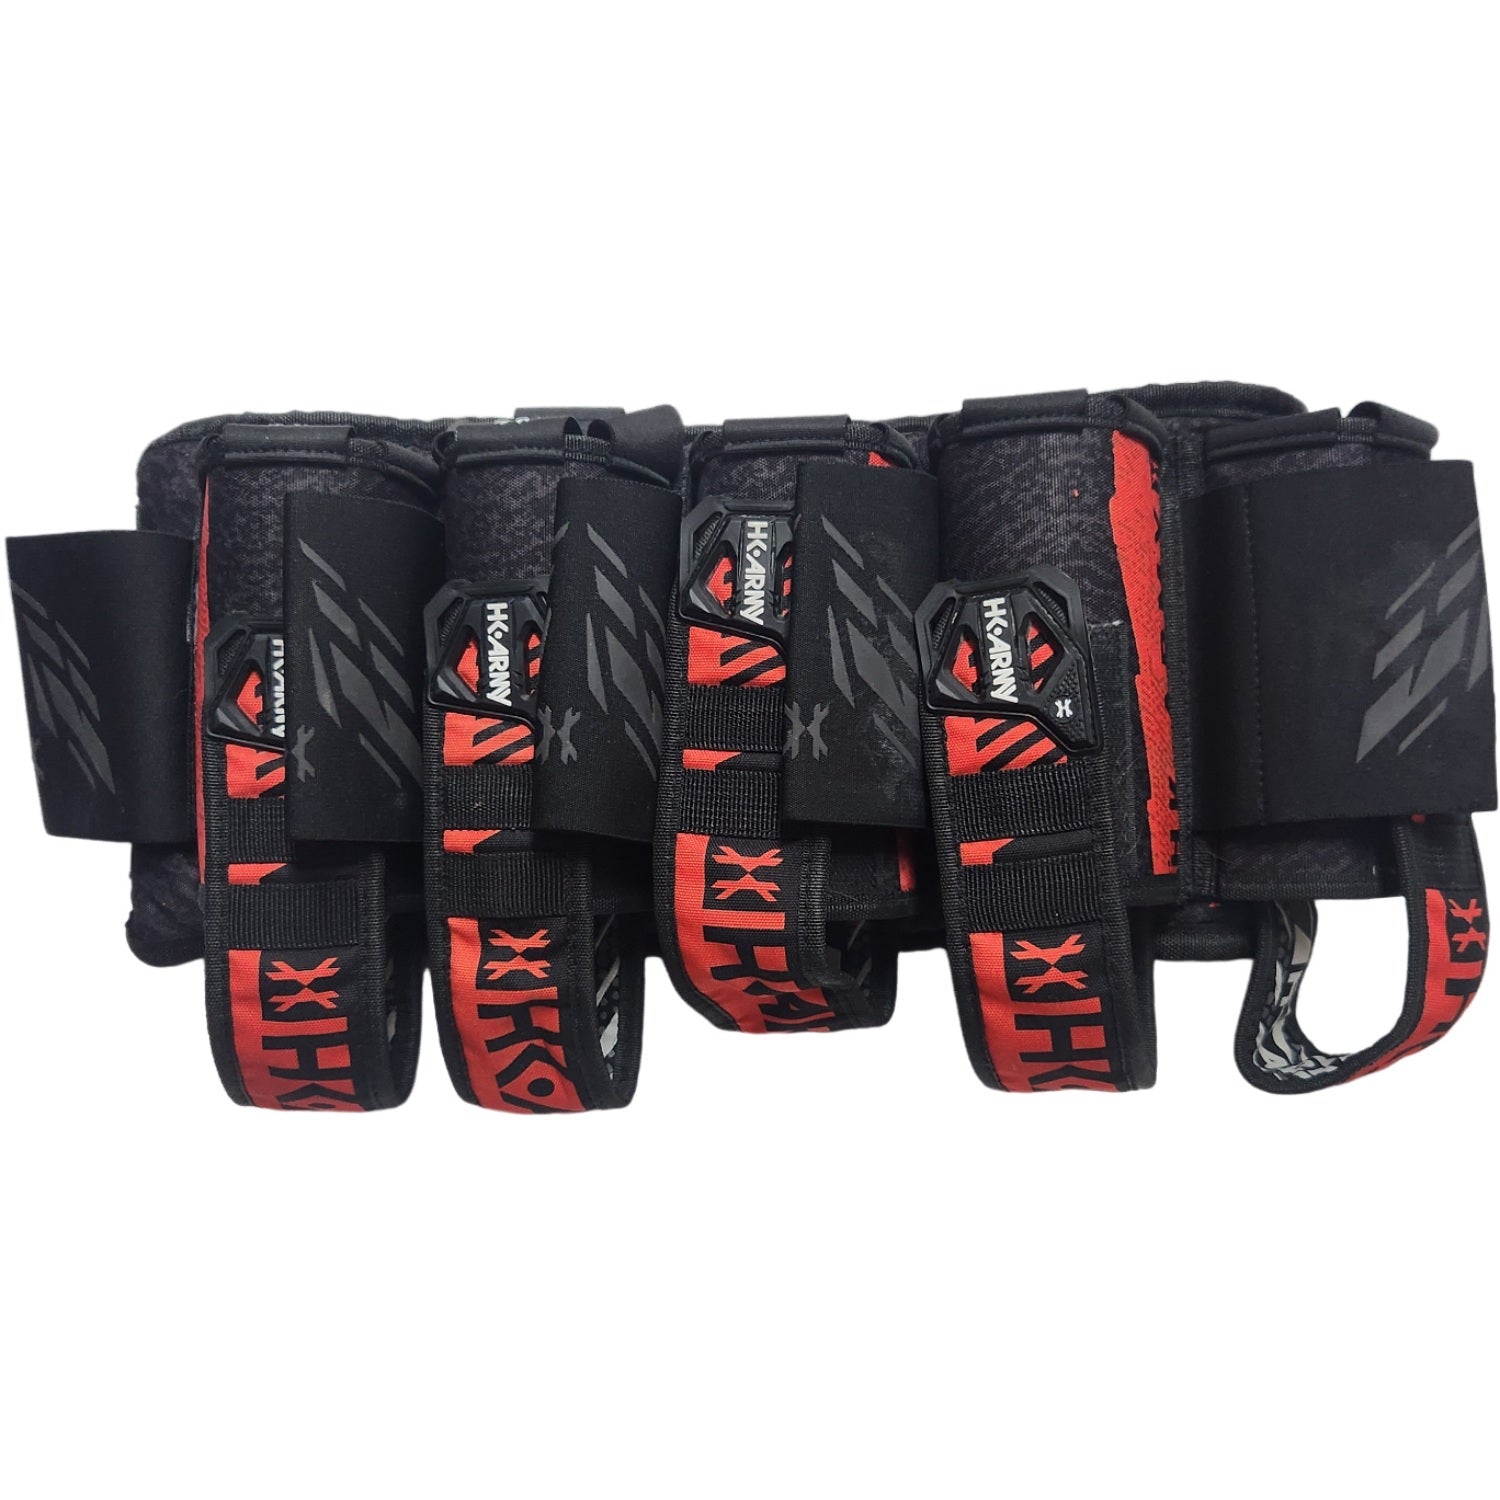 HK Army Eject pack 5+ - Black/Red